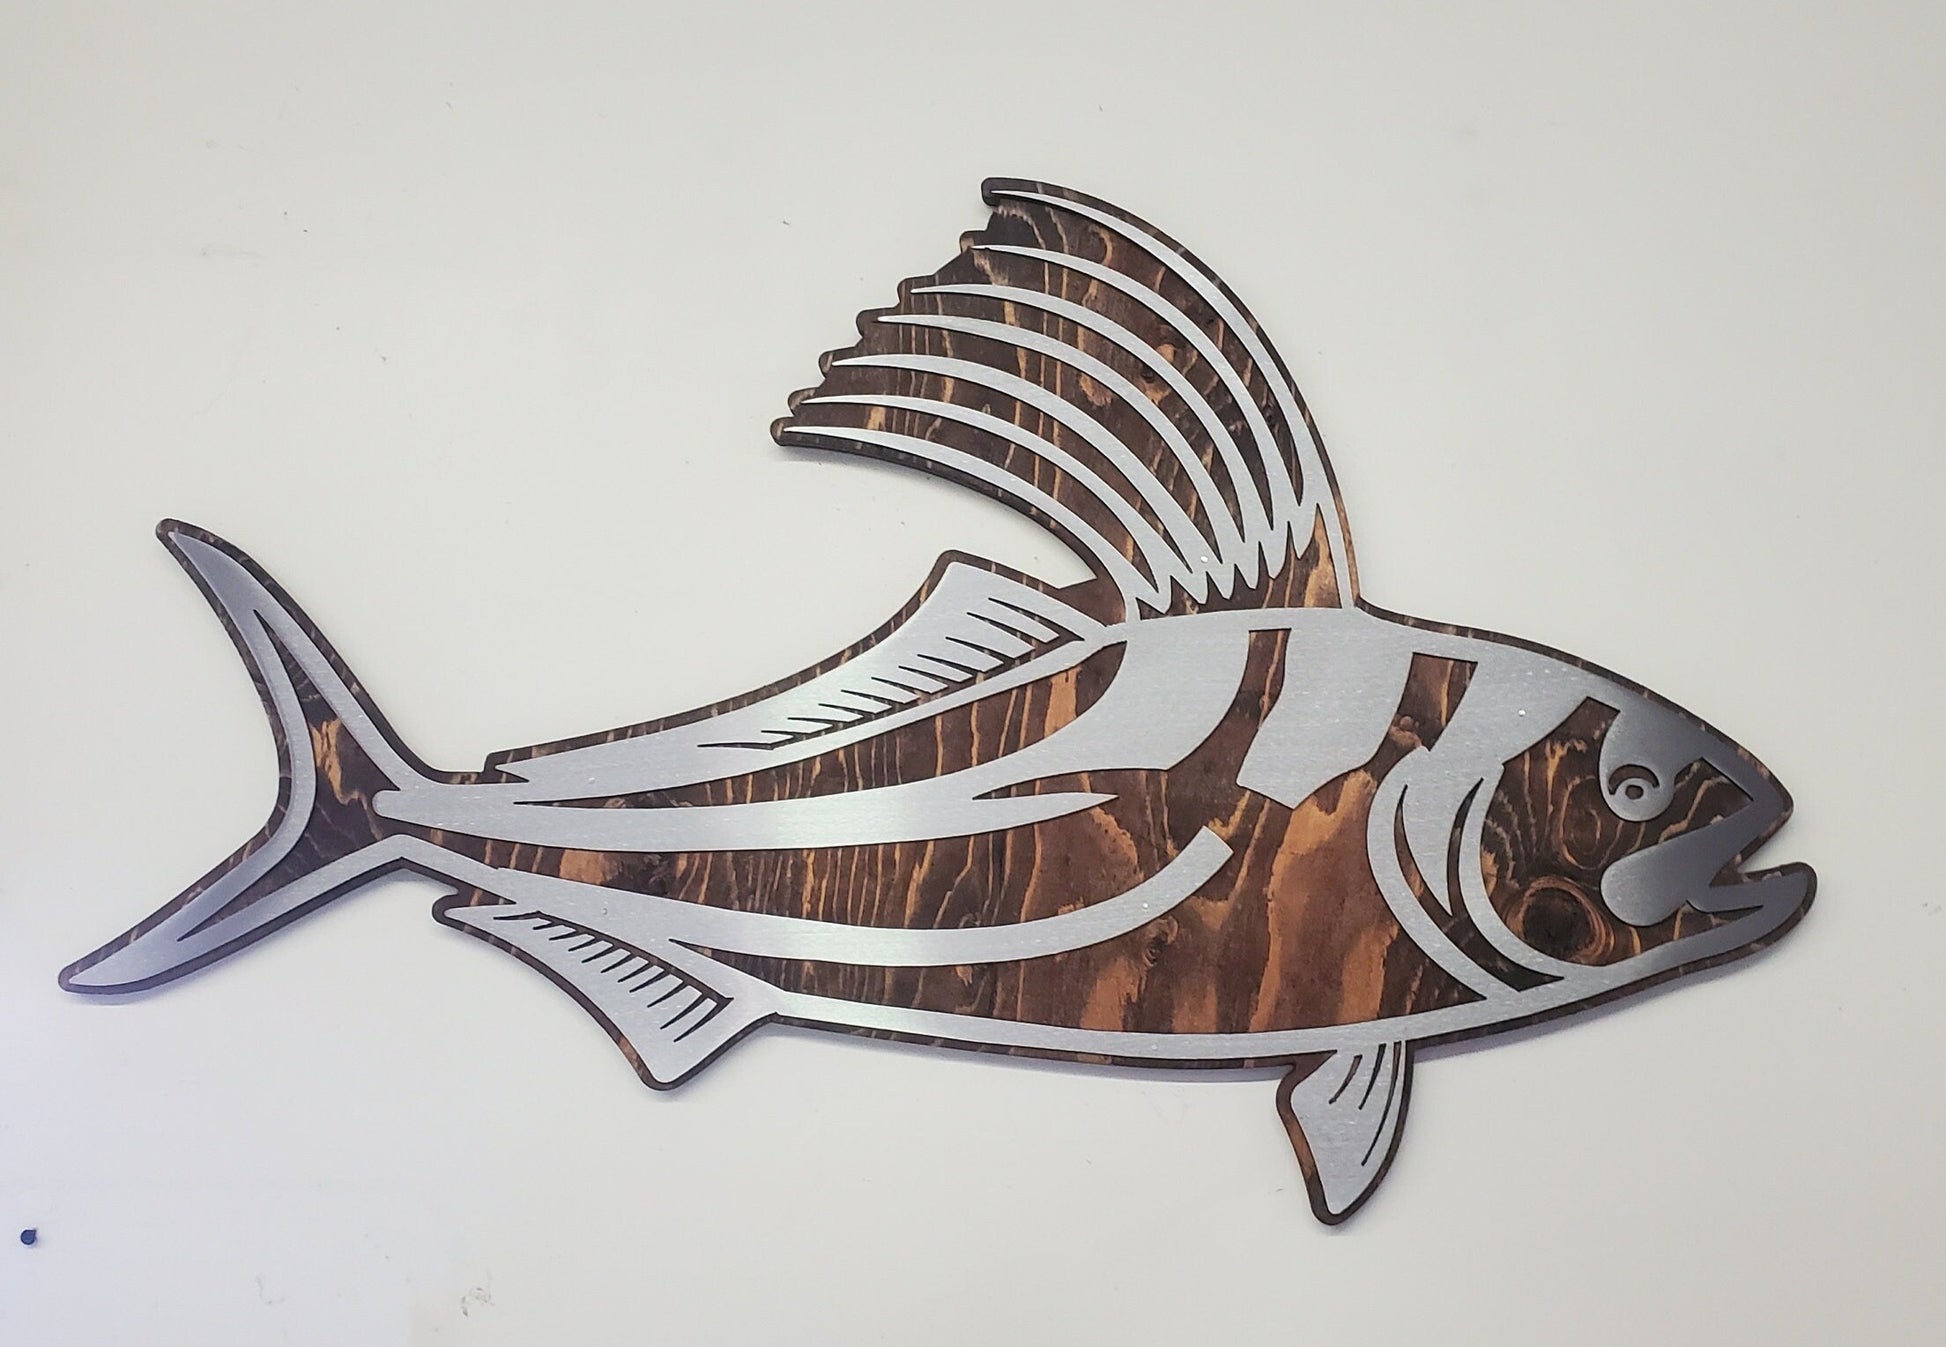 CNC cut metal rooster fish on a rustic stained wood background, handcrafted by a small family shop in Minnesota. The clear-coated steel rooster fish has intricate details and is designed for indoor or covered outdoor display